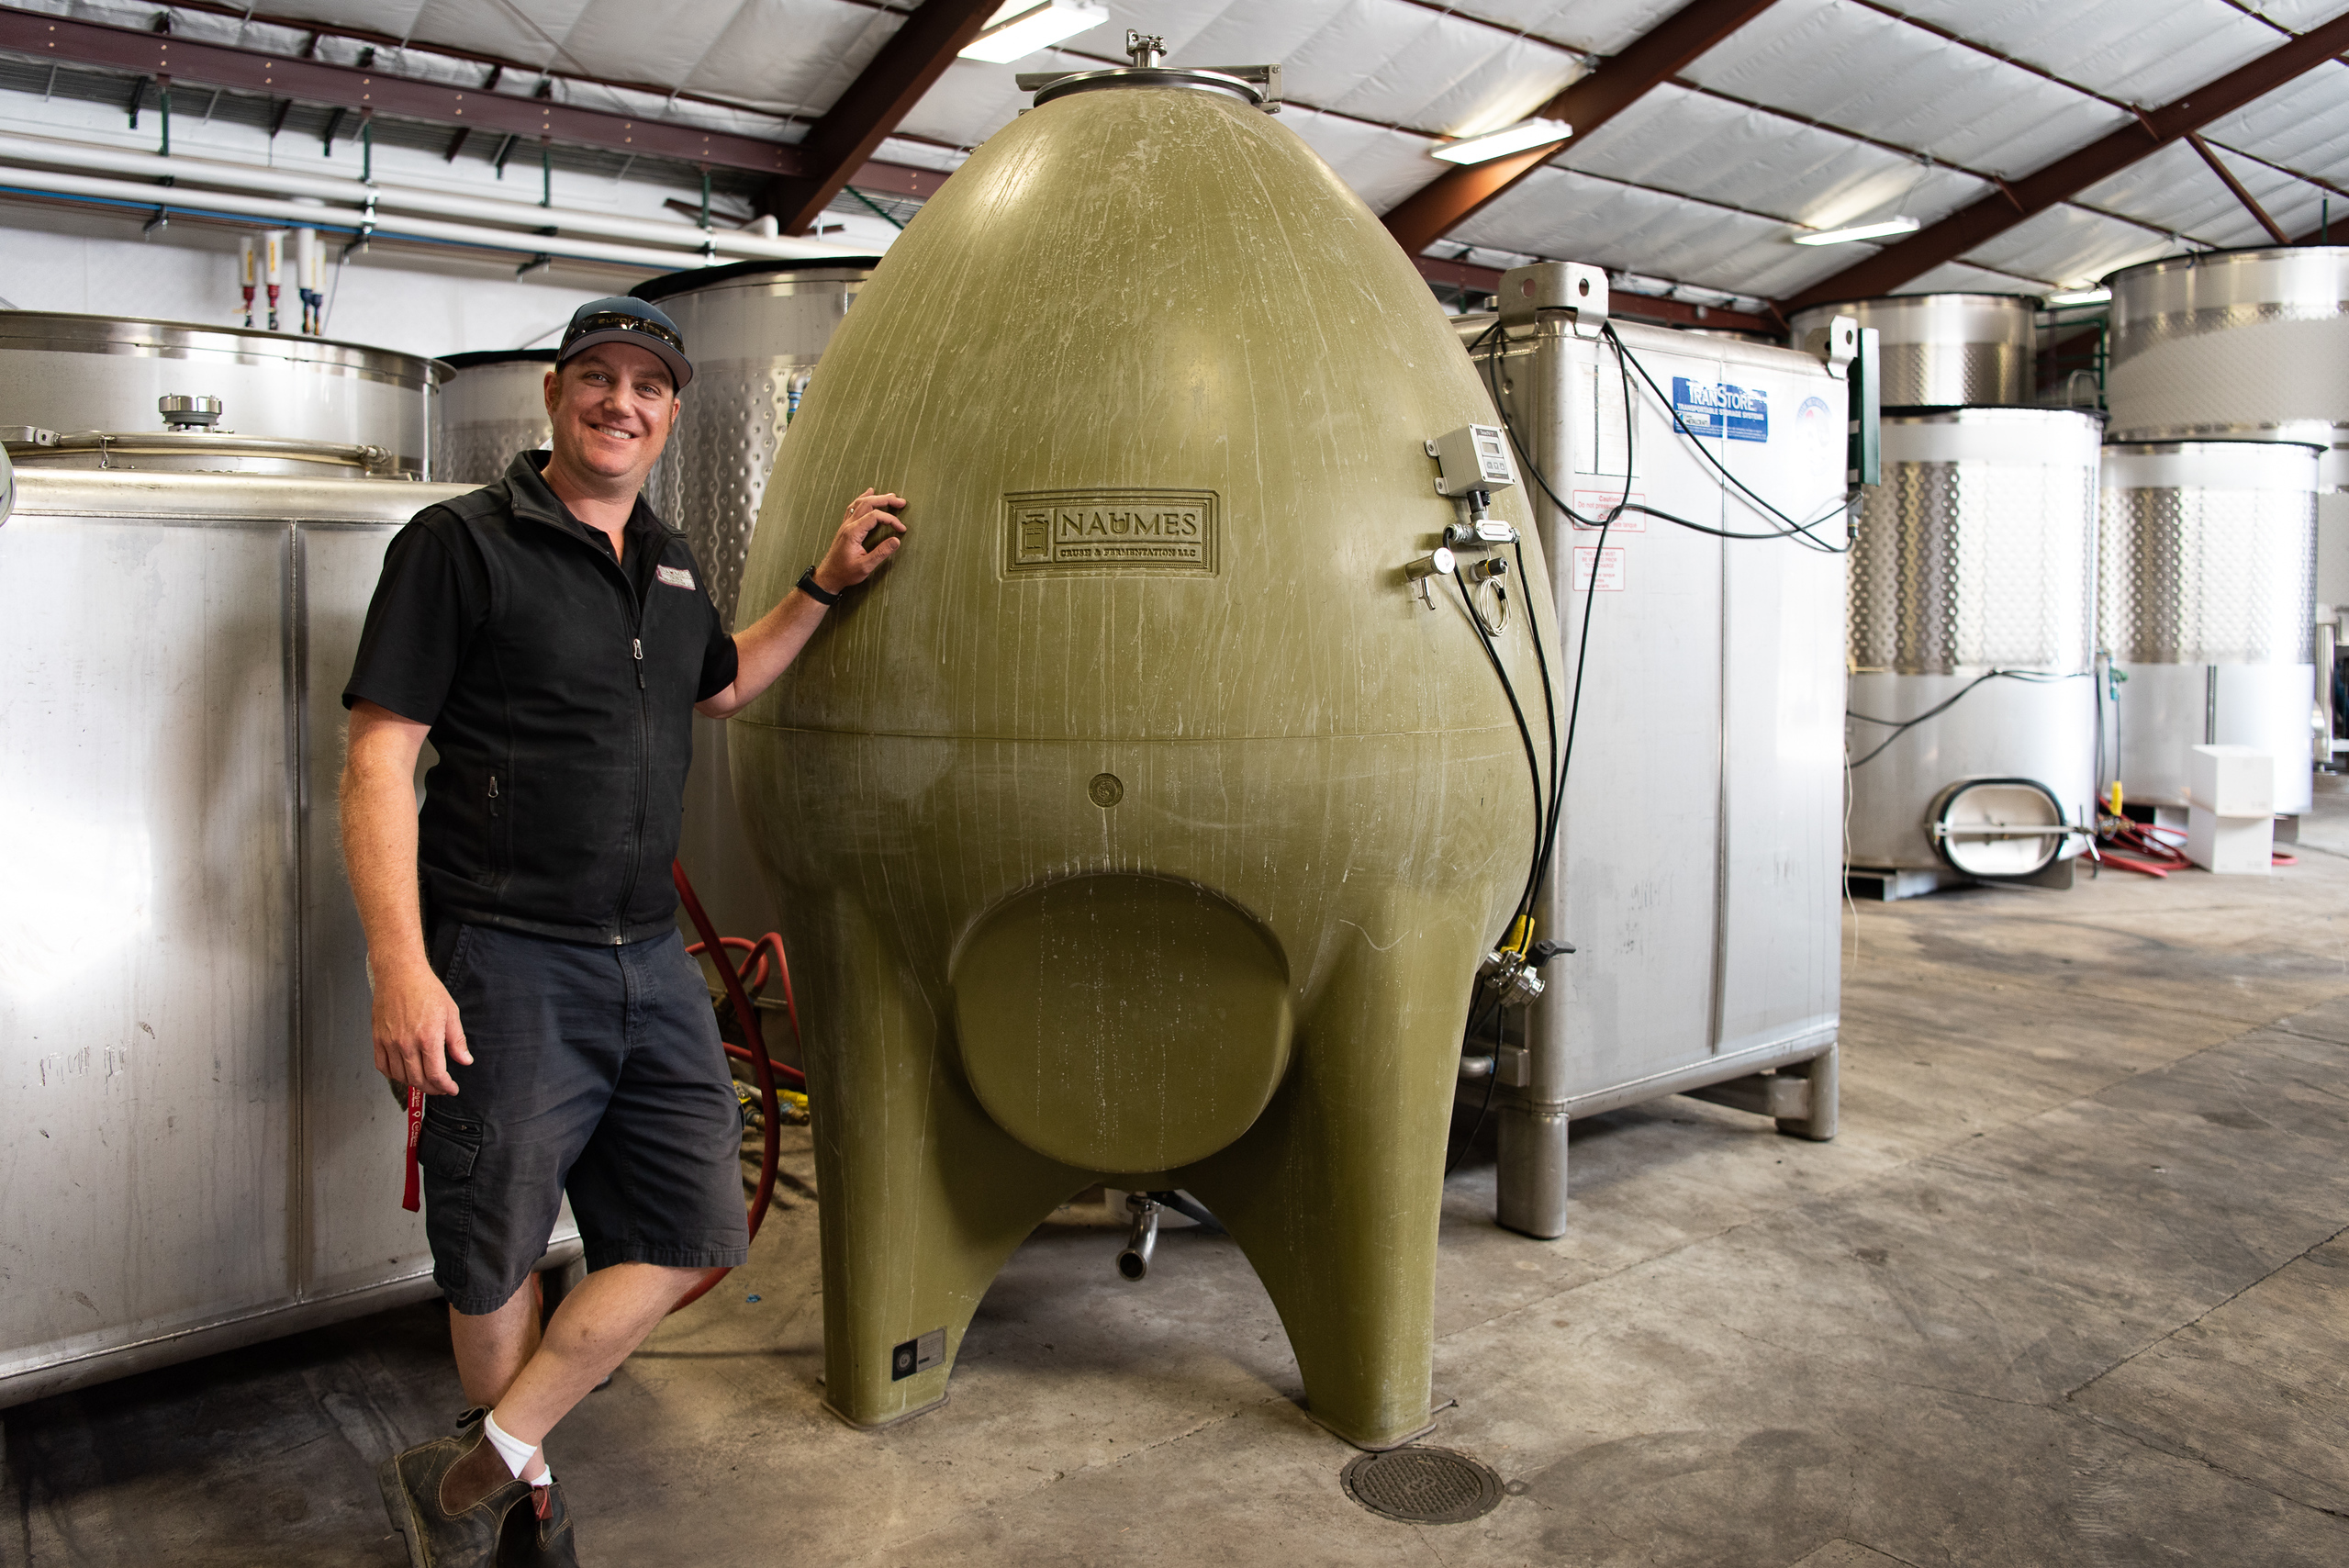 Winemaker Chris Graves stands smiling next to a specialized ceramic fermentation container shaped like an enormous green egg.